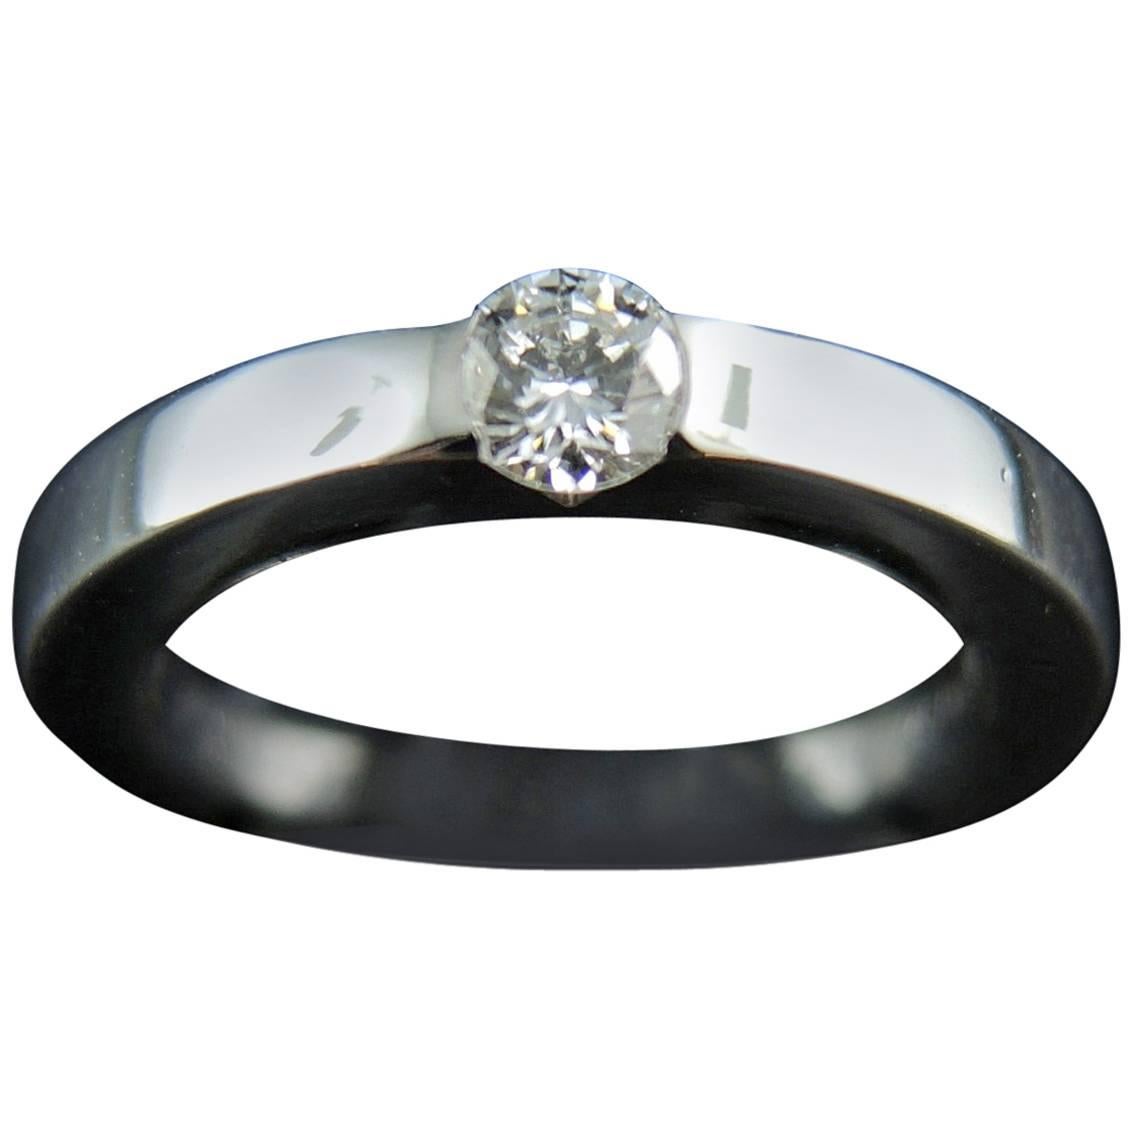 Cartier Solitaire Engagement Diamond Ring 0.21 Carat White Gold